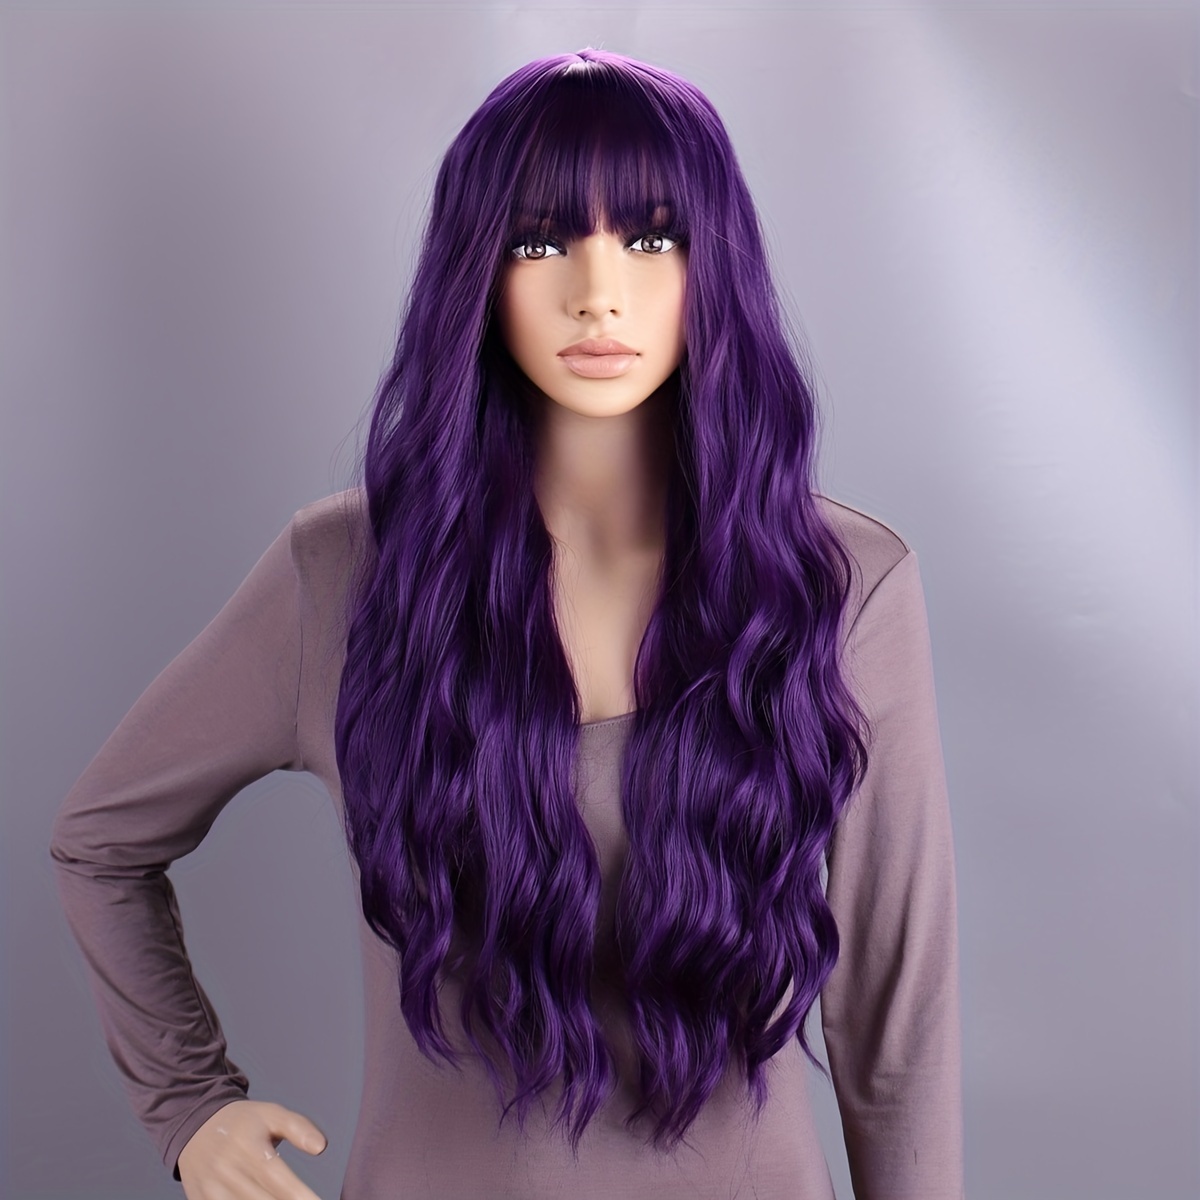 

26inch 100% High Temperature Fiber Purple Long Curly Hair Wig, Artificial Wig With Bangs Multi-color Long Fluffy Thick Natural Fashion Wig, Hair Wig Cosplay Party Dress Wig For Daily Use Wig